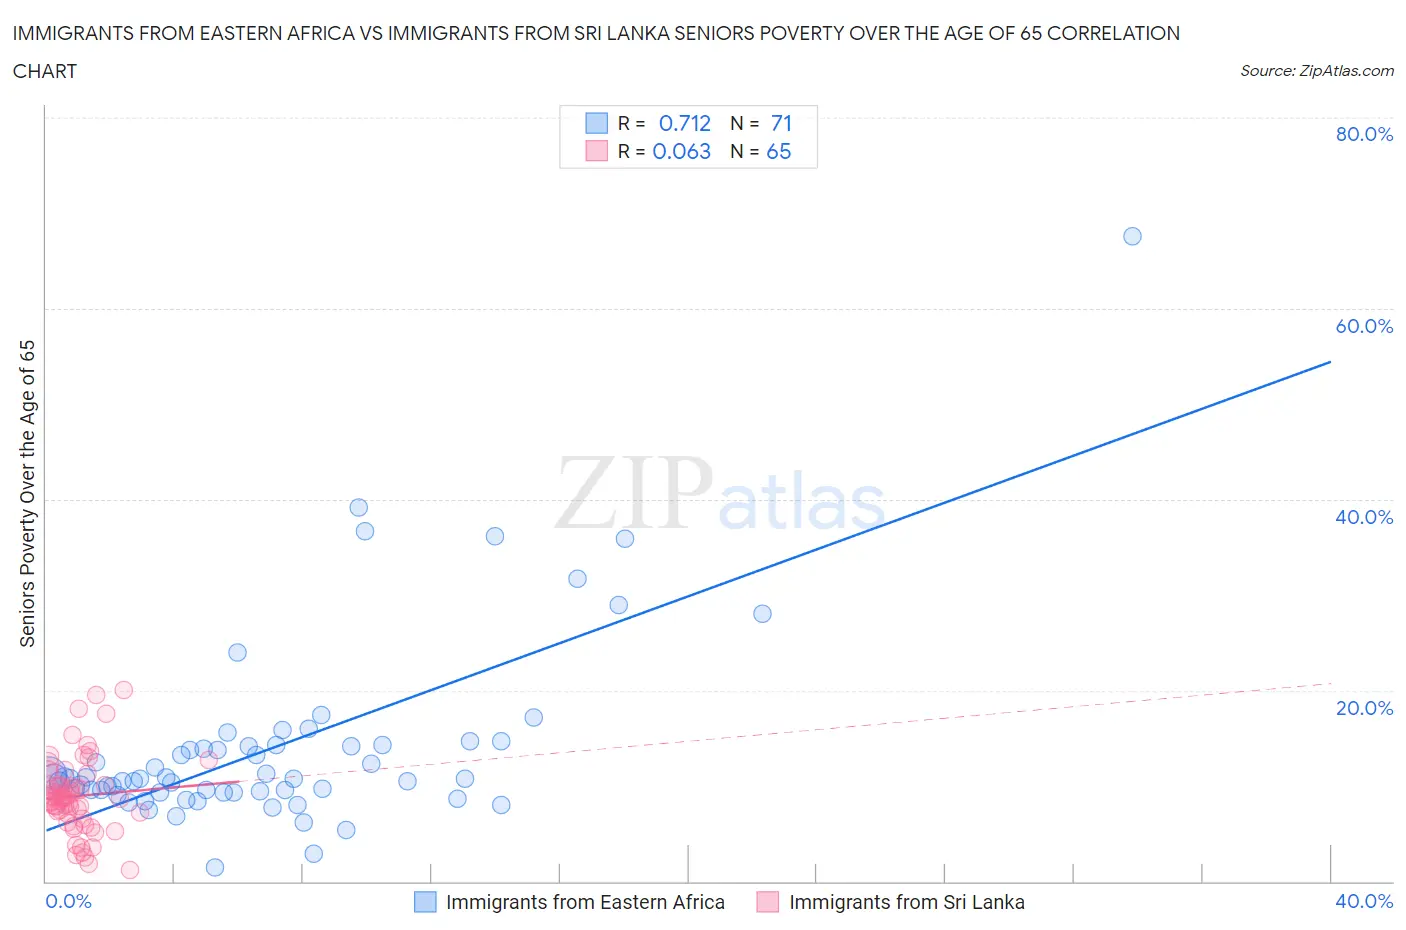 Immigrants from Eastern Africa vs Immigrants from Sri Lanka Seniors Poverty Over the Age of 65